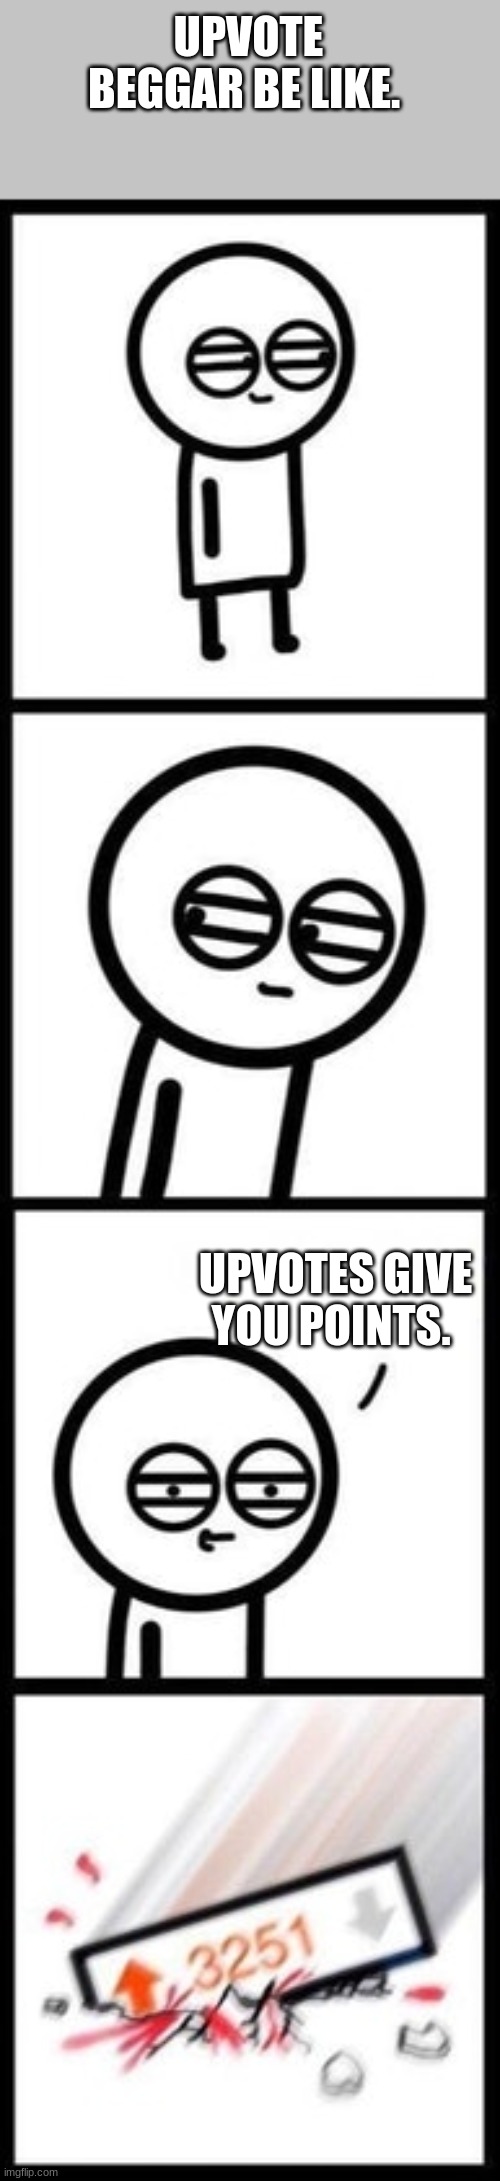 3251 upvotes | UPVOTE BEGGAR BE LIKE. UPVOTES GIVE YOU POINTS. | image tagged in 3251 upvotes | made w/ Imgflip meme maker